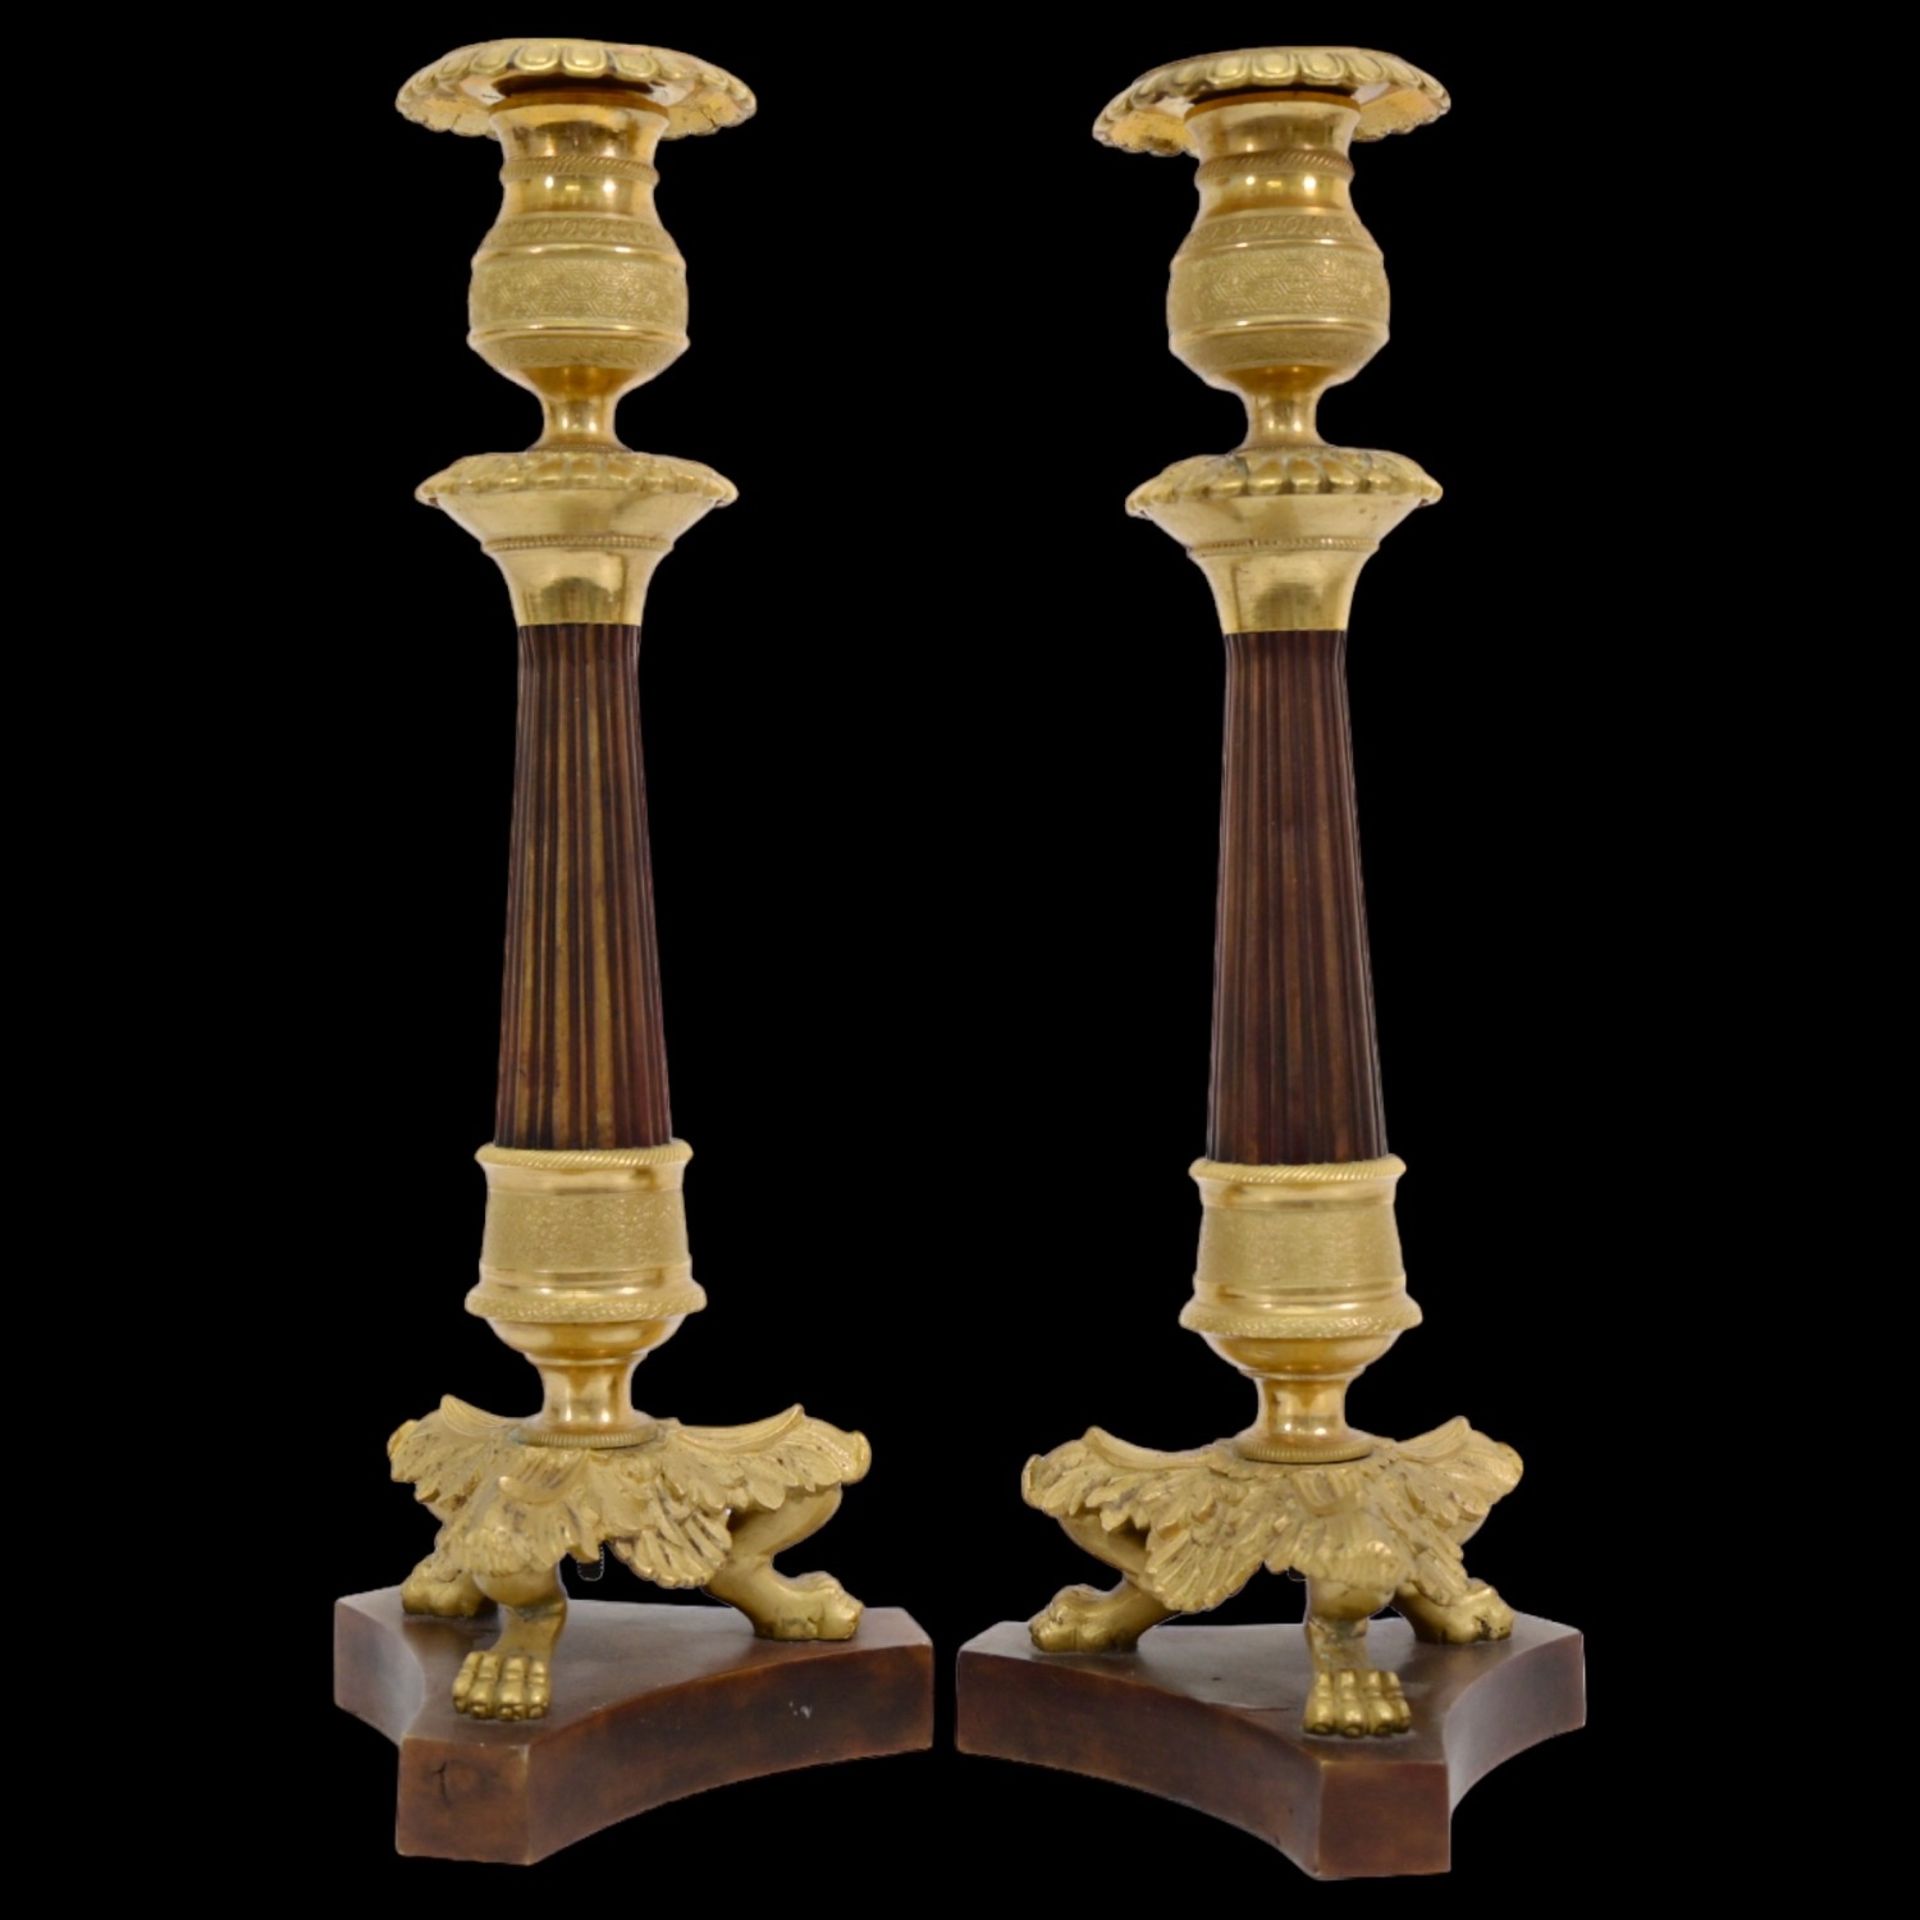 Pair of candlesticks in gilded bronze and wood, France, 19th century, collectibles and home decor. - Bild 2 aus 9